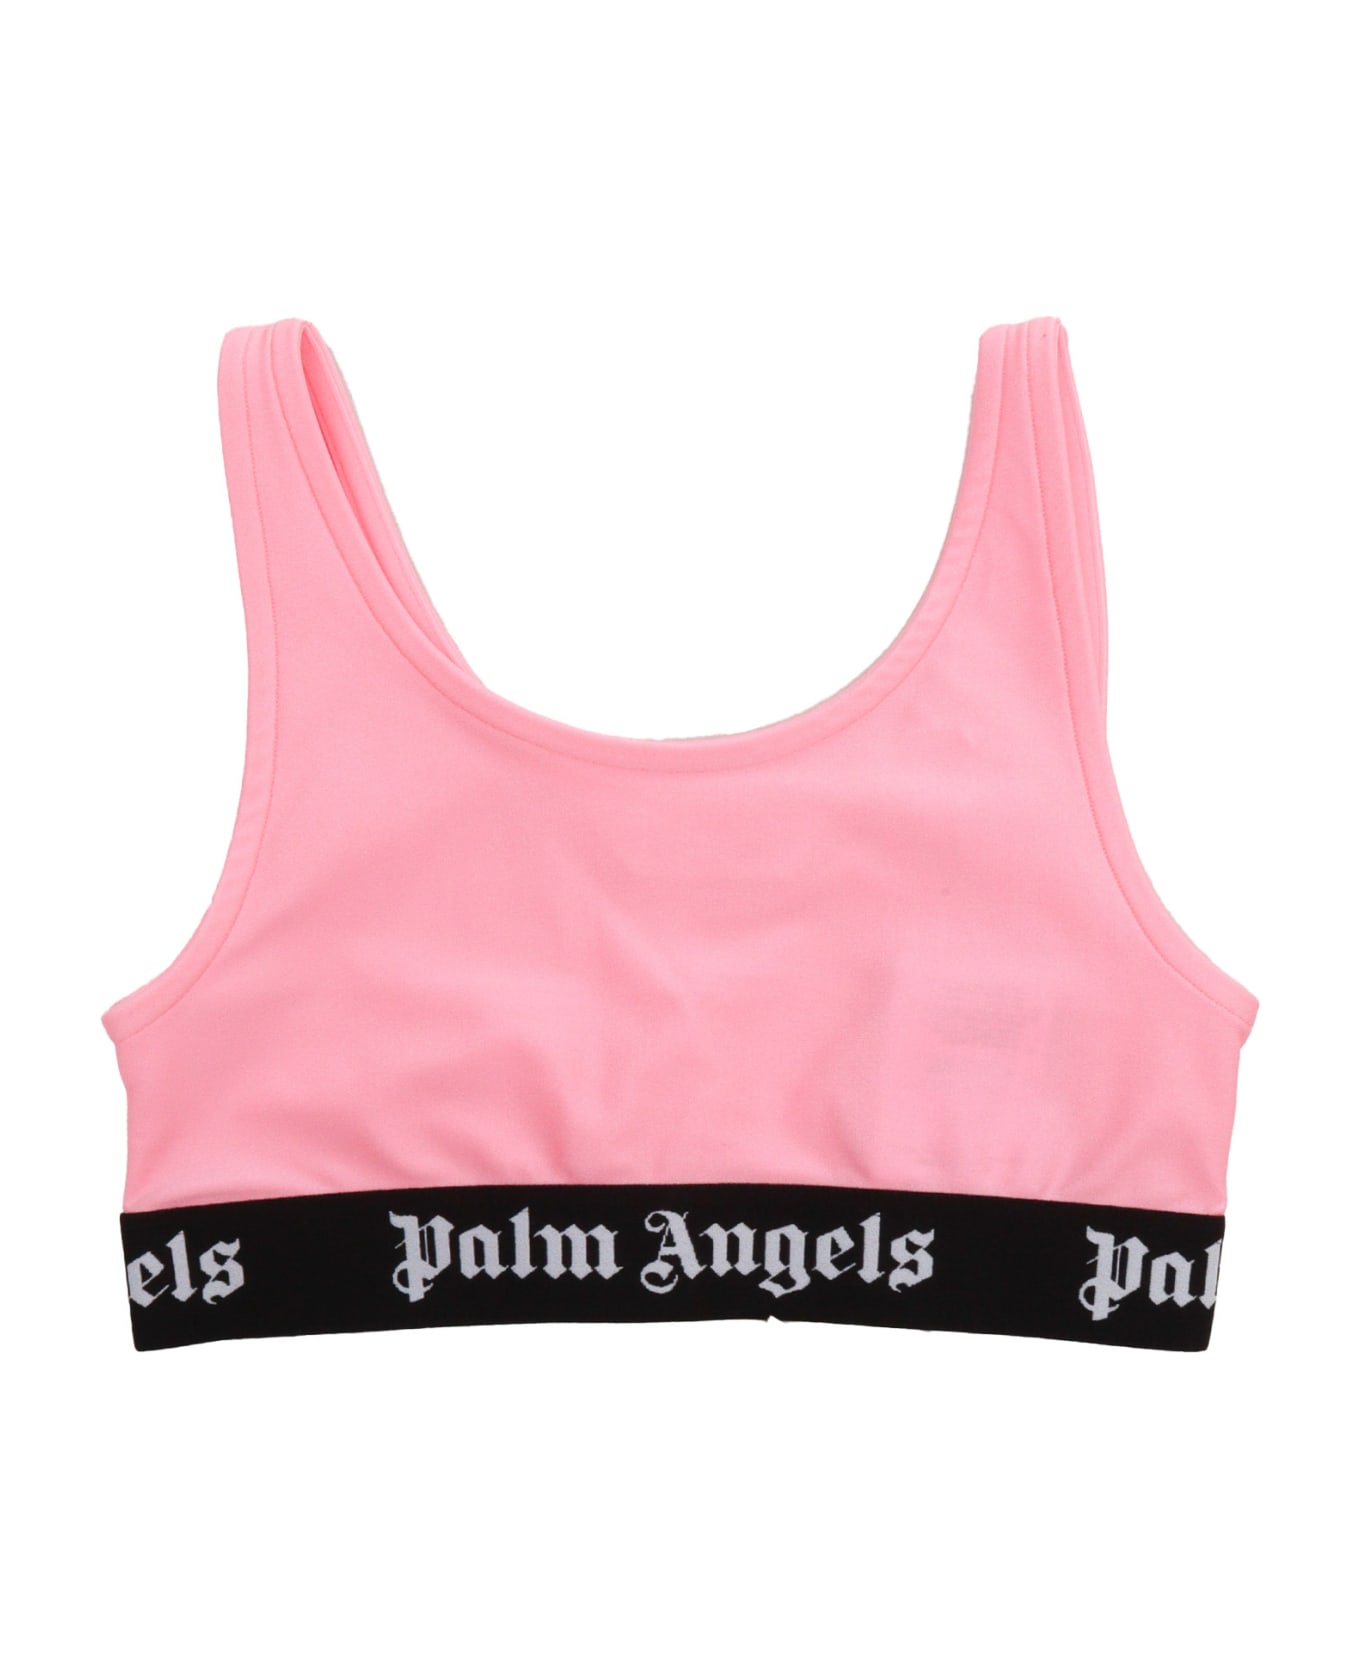 Palm Angels Pink Sports Top - PINK トップス